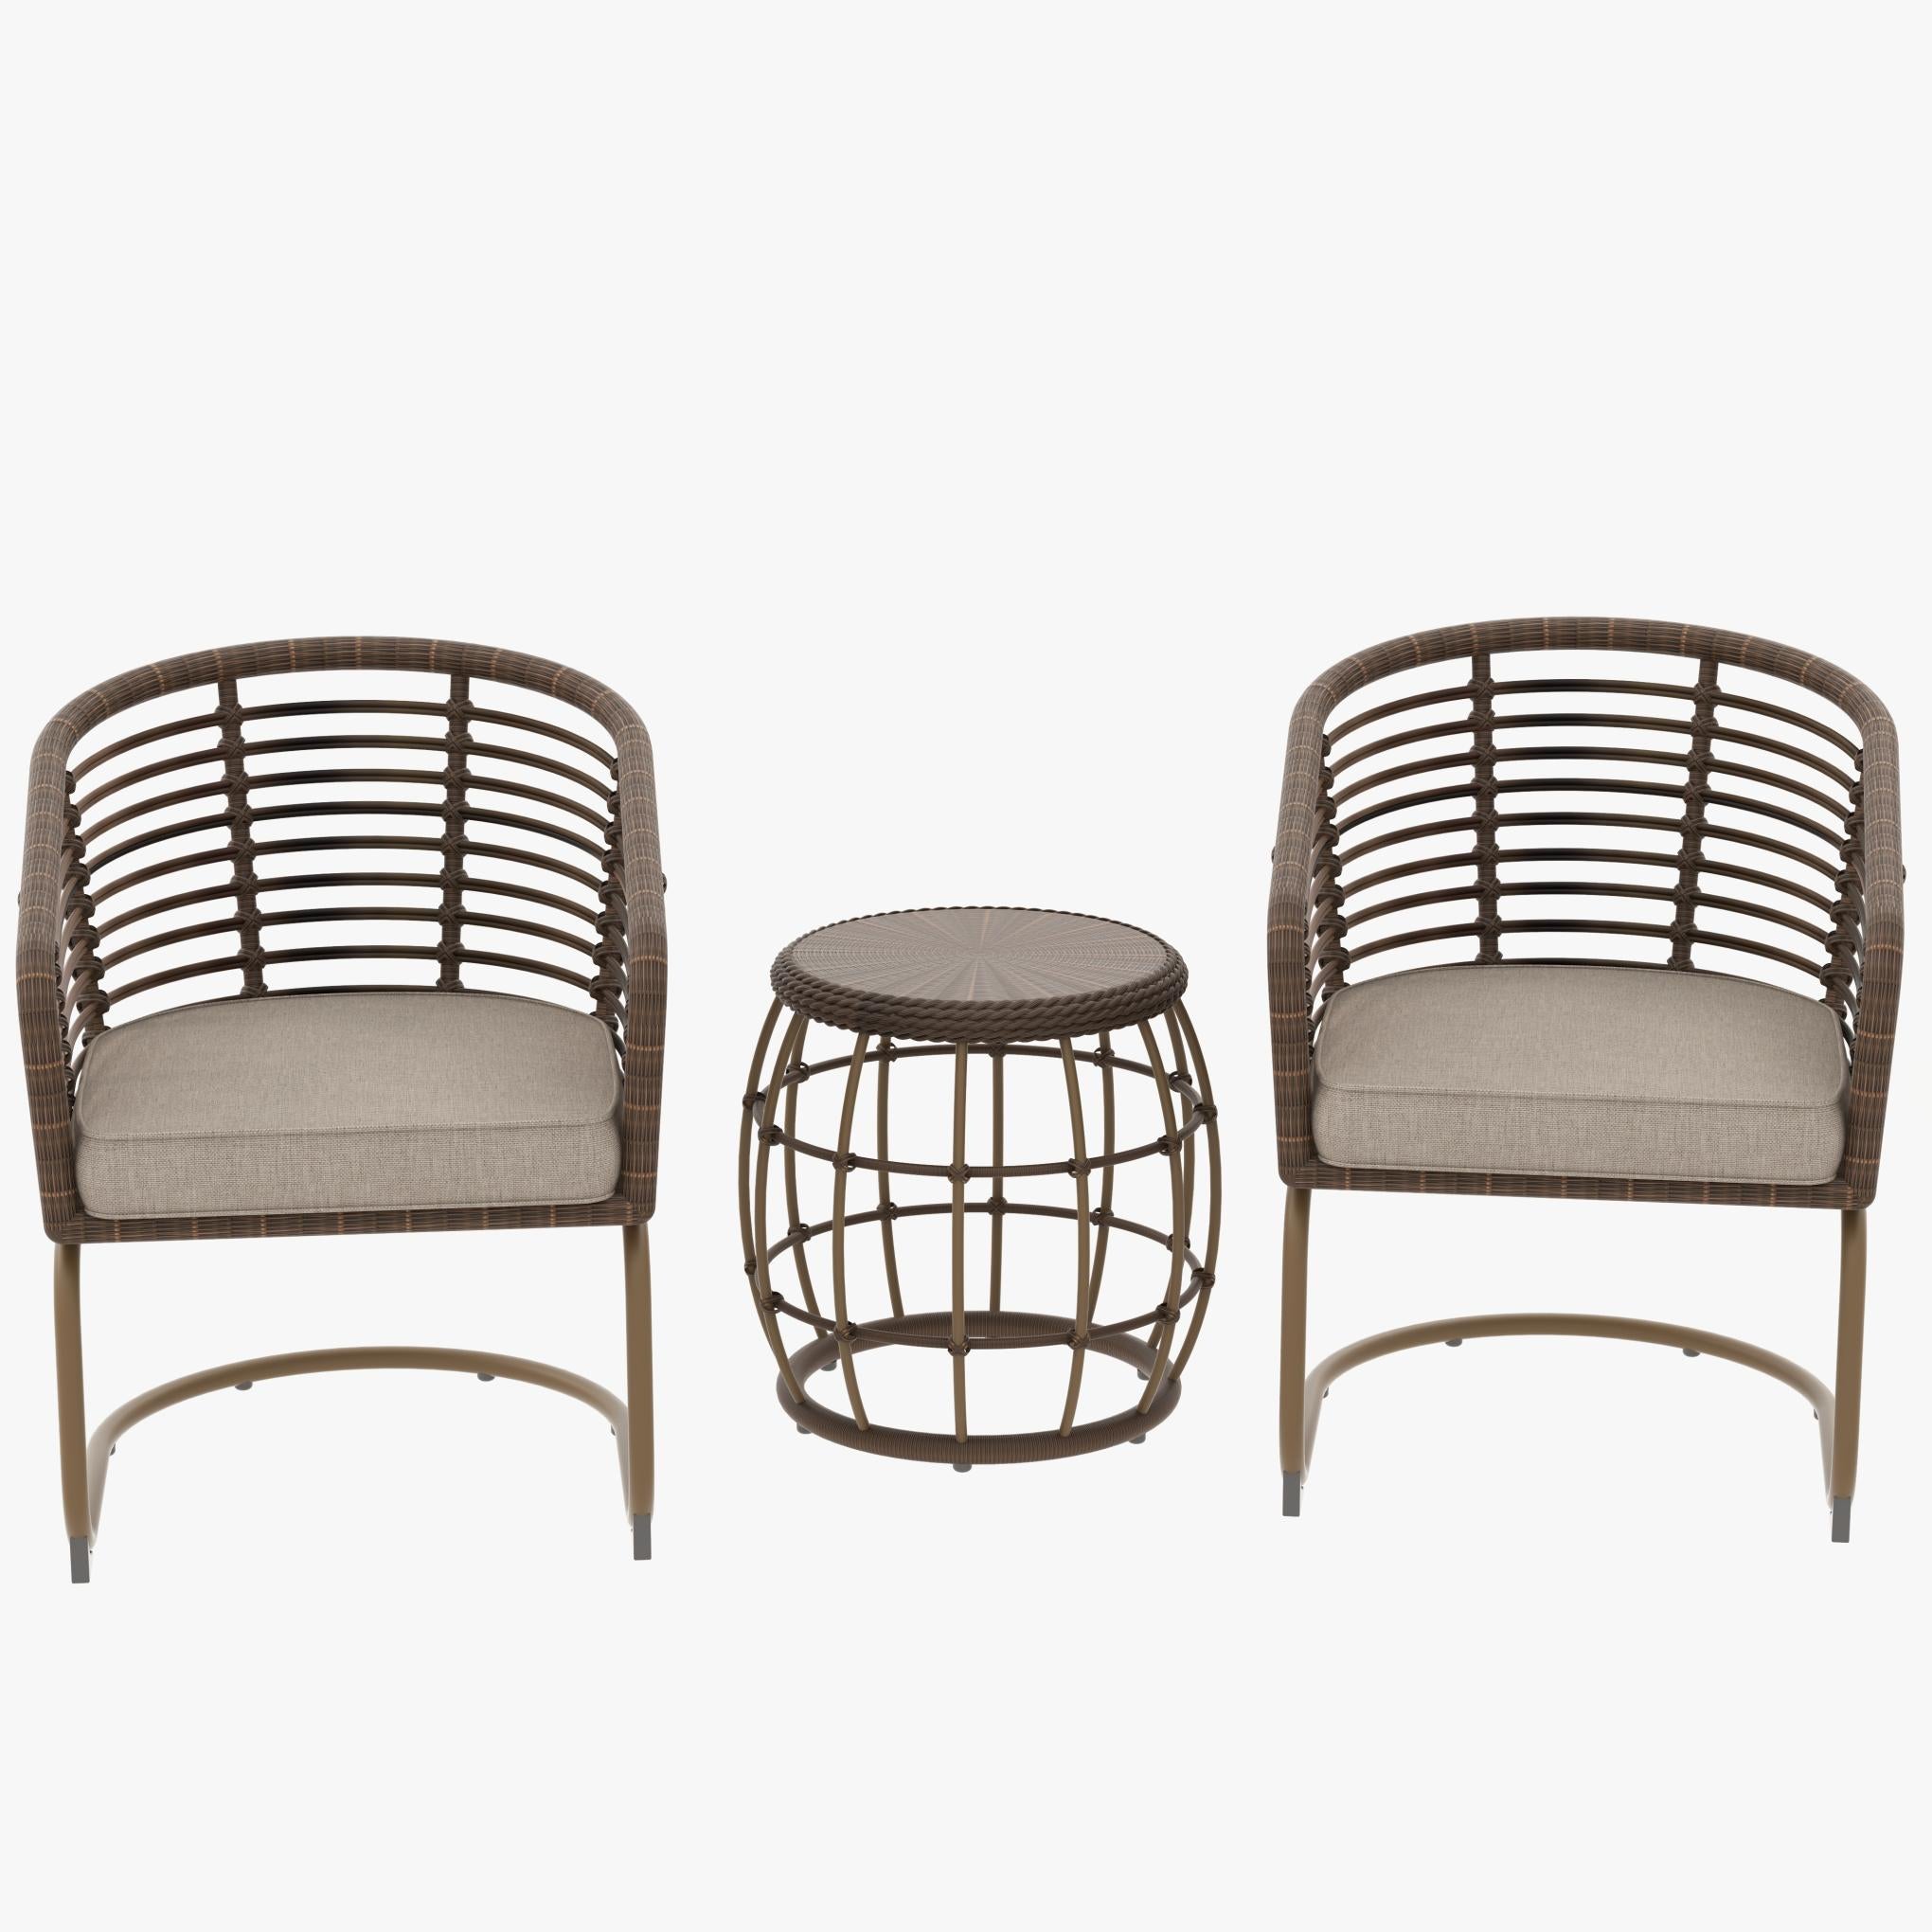 3 Piece Outdoor Rattan Sectional Sets With  Table